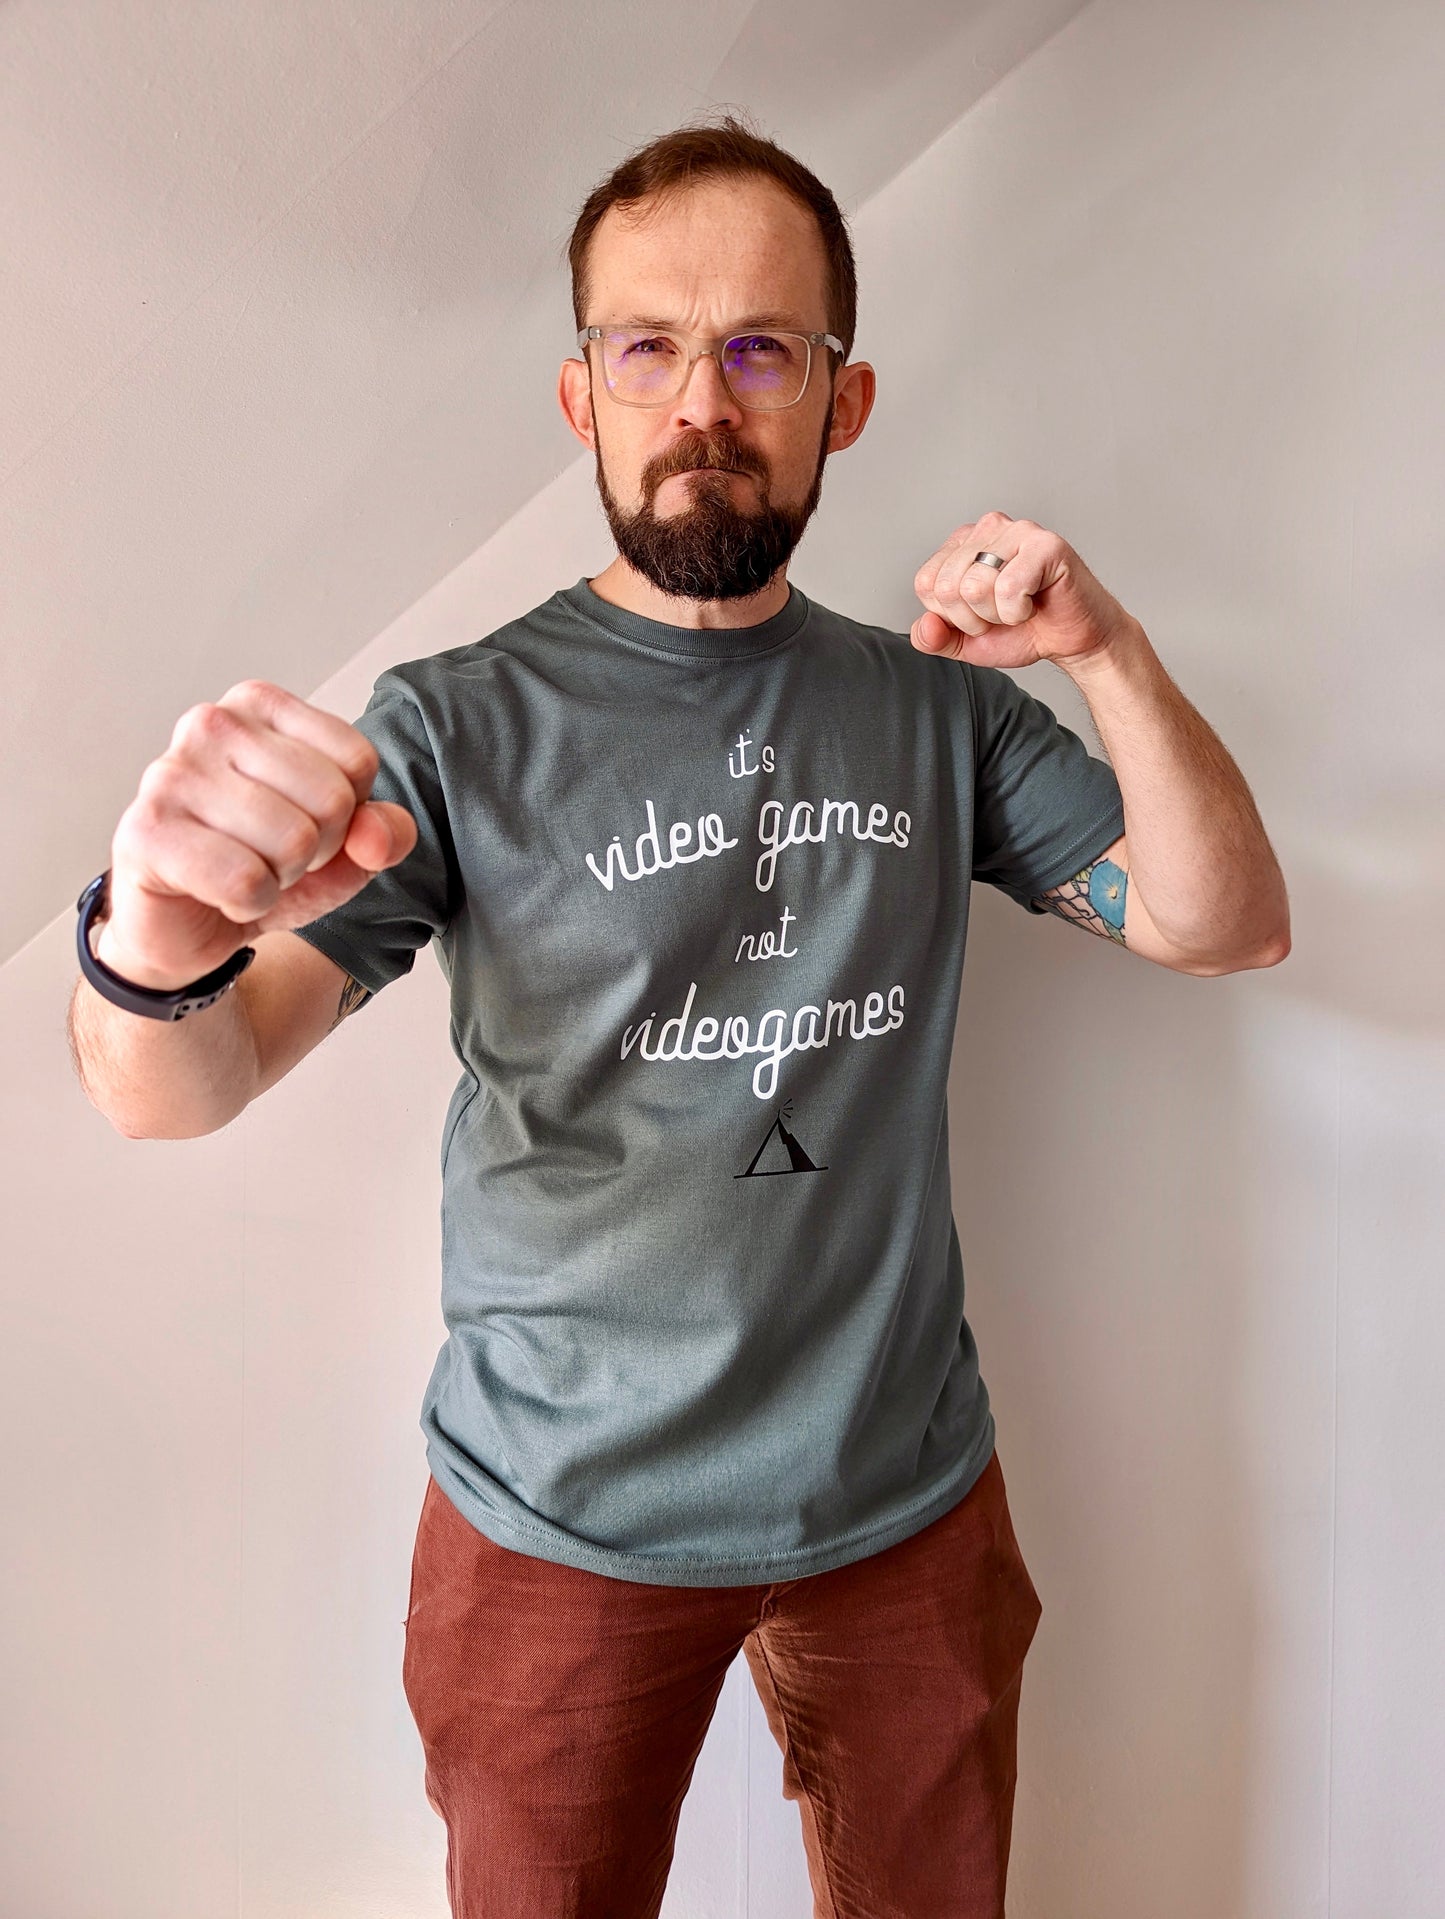 A Sage Green T-shirt that has cursive writing on it in white. In lowercase letters the first line reads “it’s”, the second line “video games” using two words, the third line “not” and the fourth line “videogames” spelt as one word. In the centre below the text is the Mighty Yell logo in black which features the illustration of a mountain and a person on top yelling. There are three small lines coming out of the person’s mouth. 